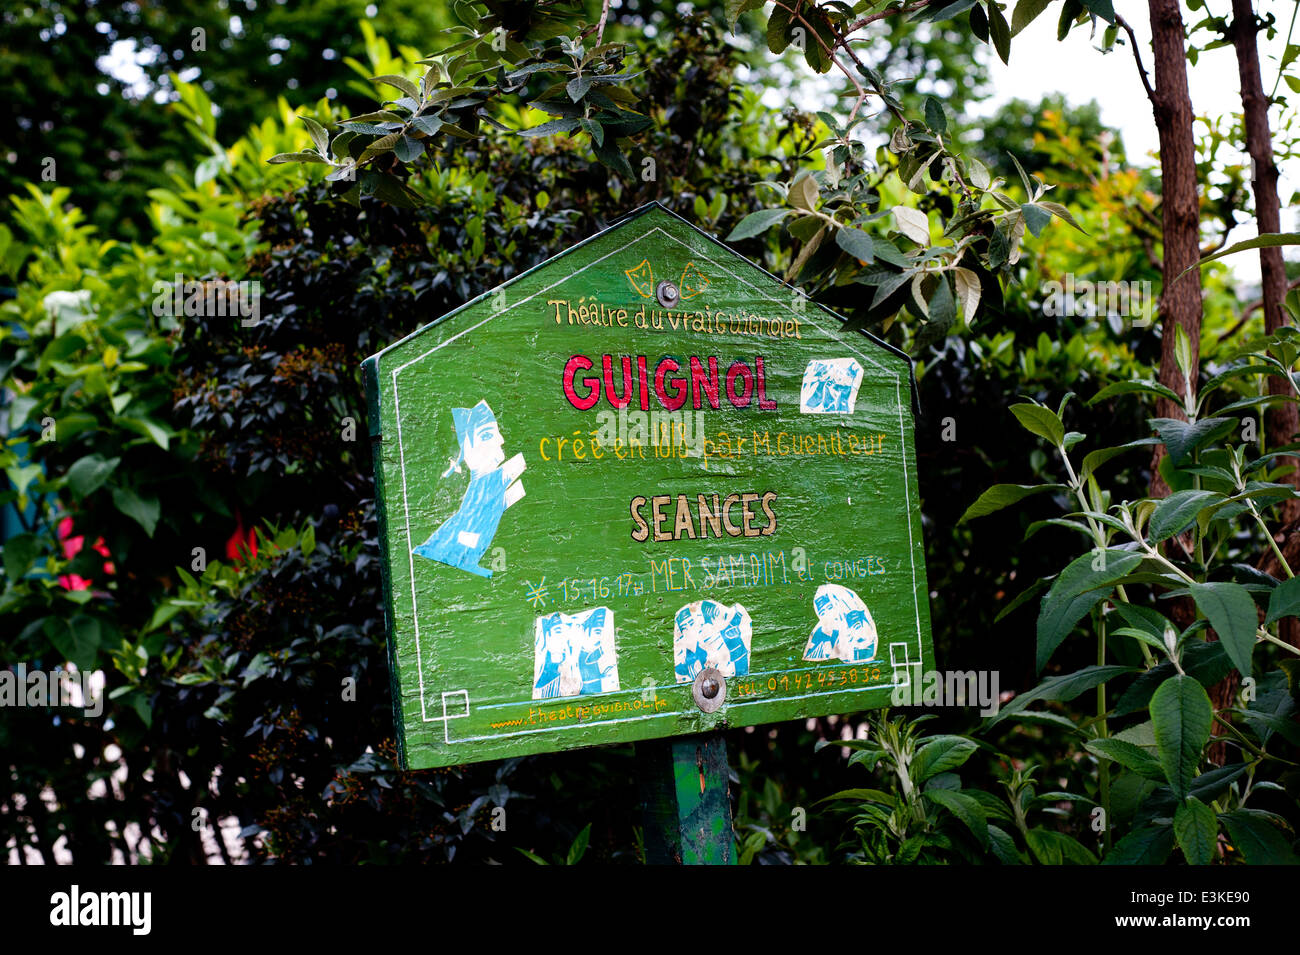 Theater Vrai Guignols in Avenue Marigny garden sign for children's puppet show. The oldest puppet theater in Paris Stock Photo